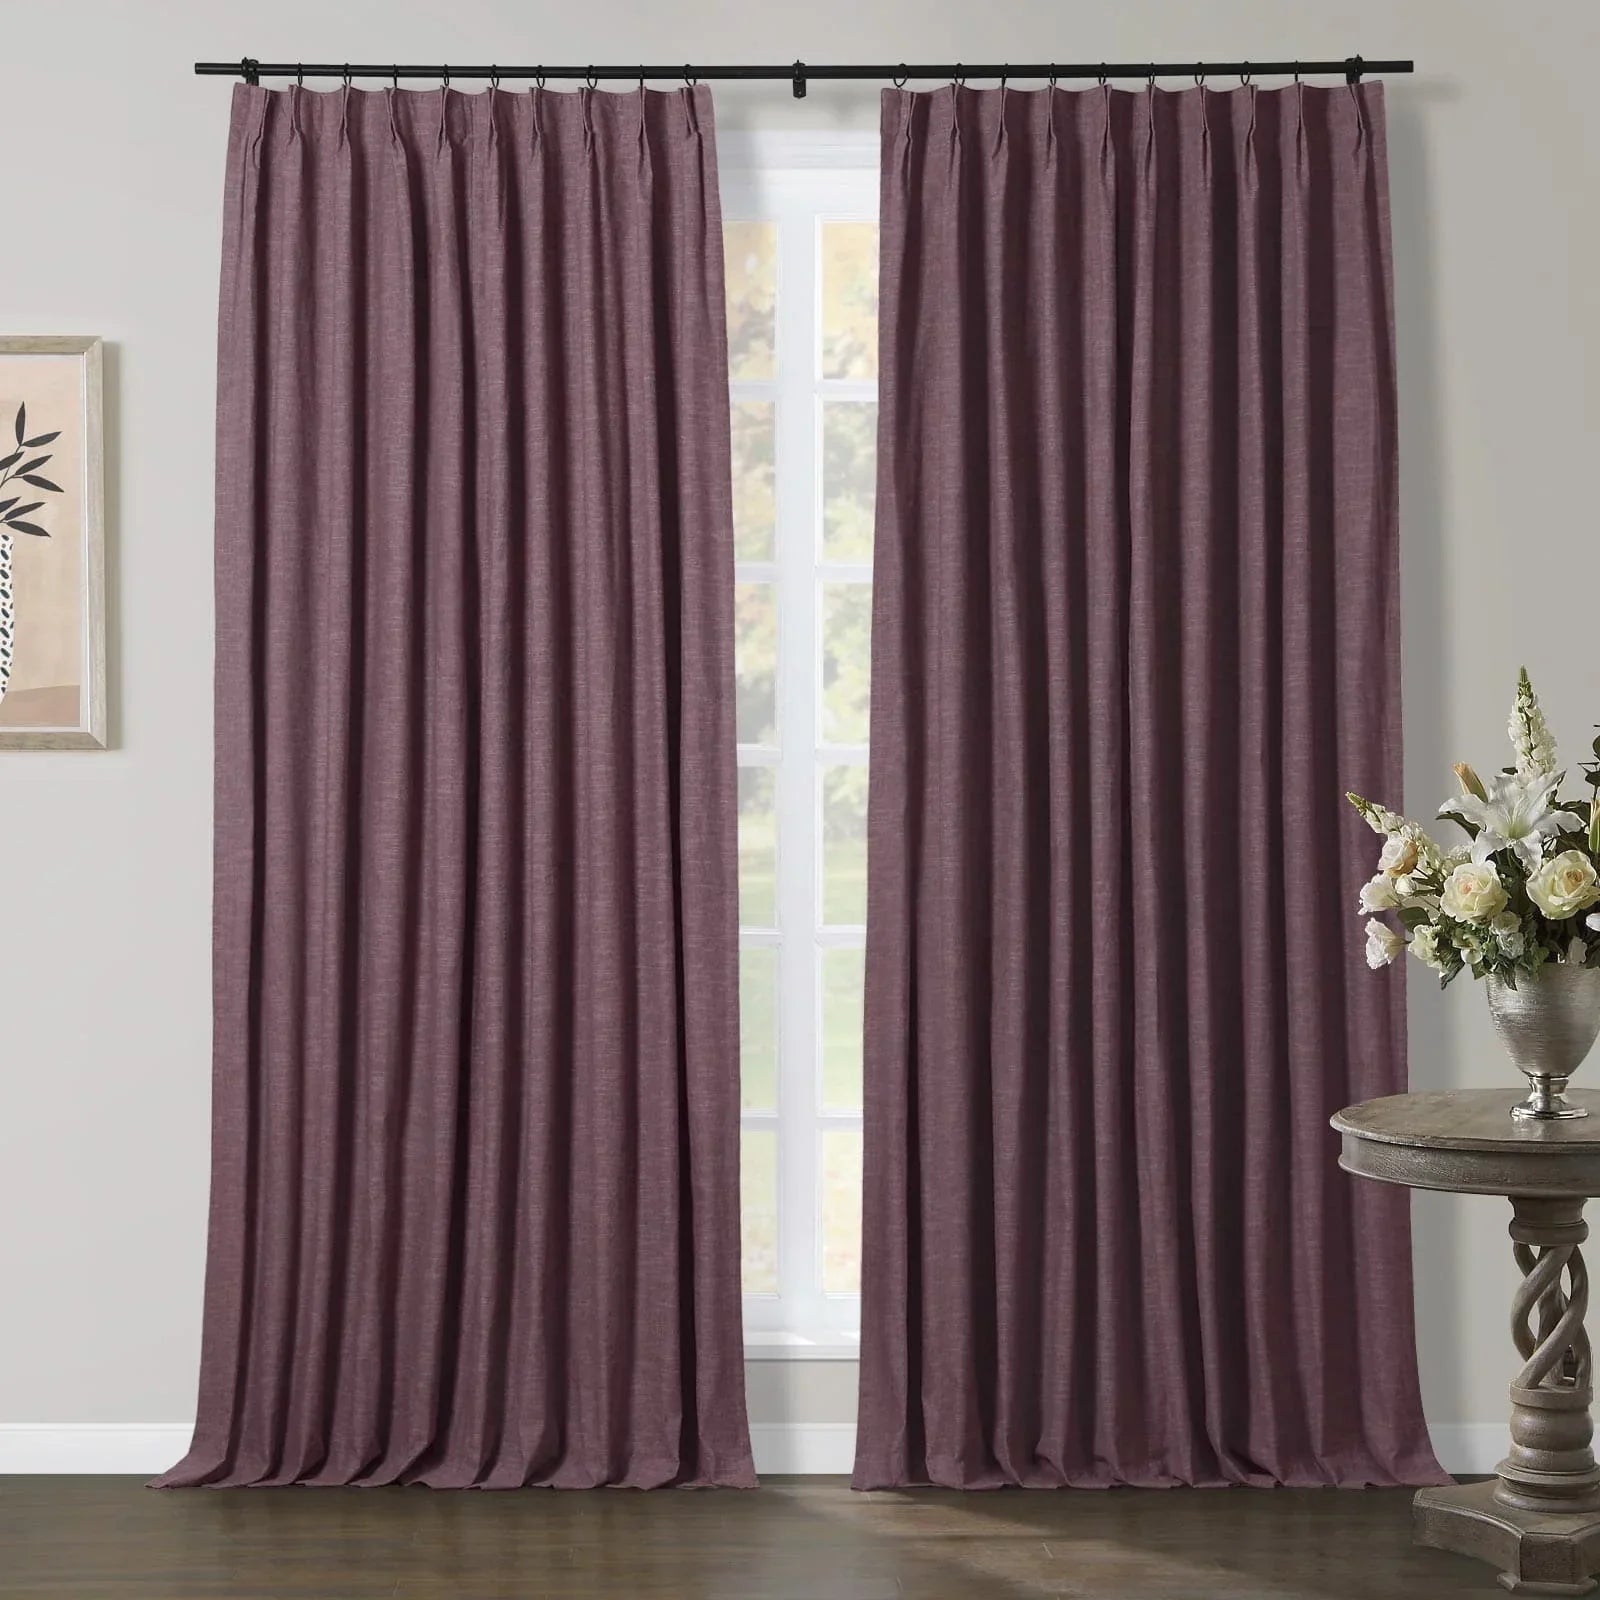 Aira Luxury Linen Cotton Curtain with pleats, Living Room/Bedroom Pleated